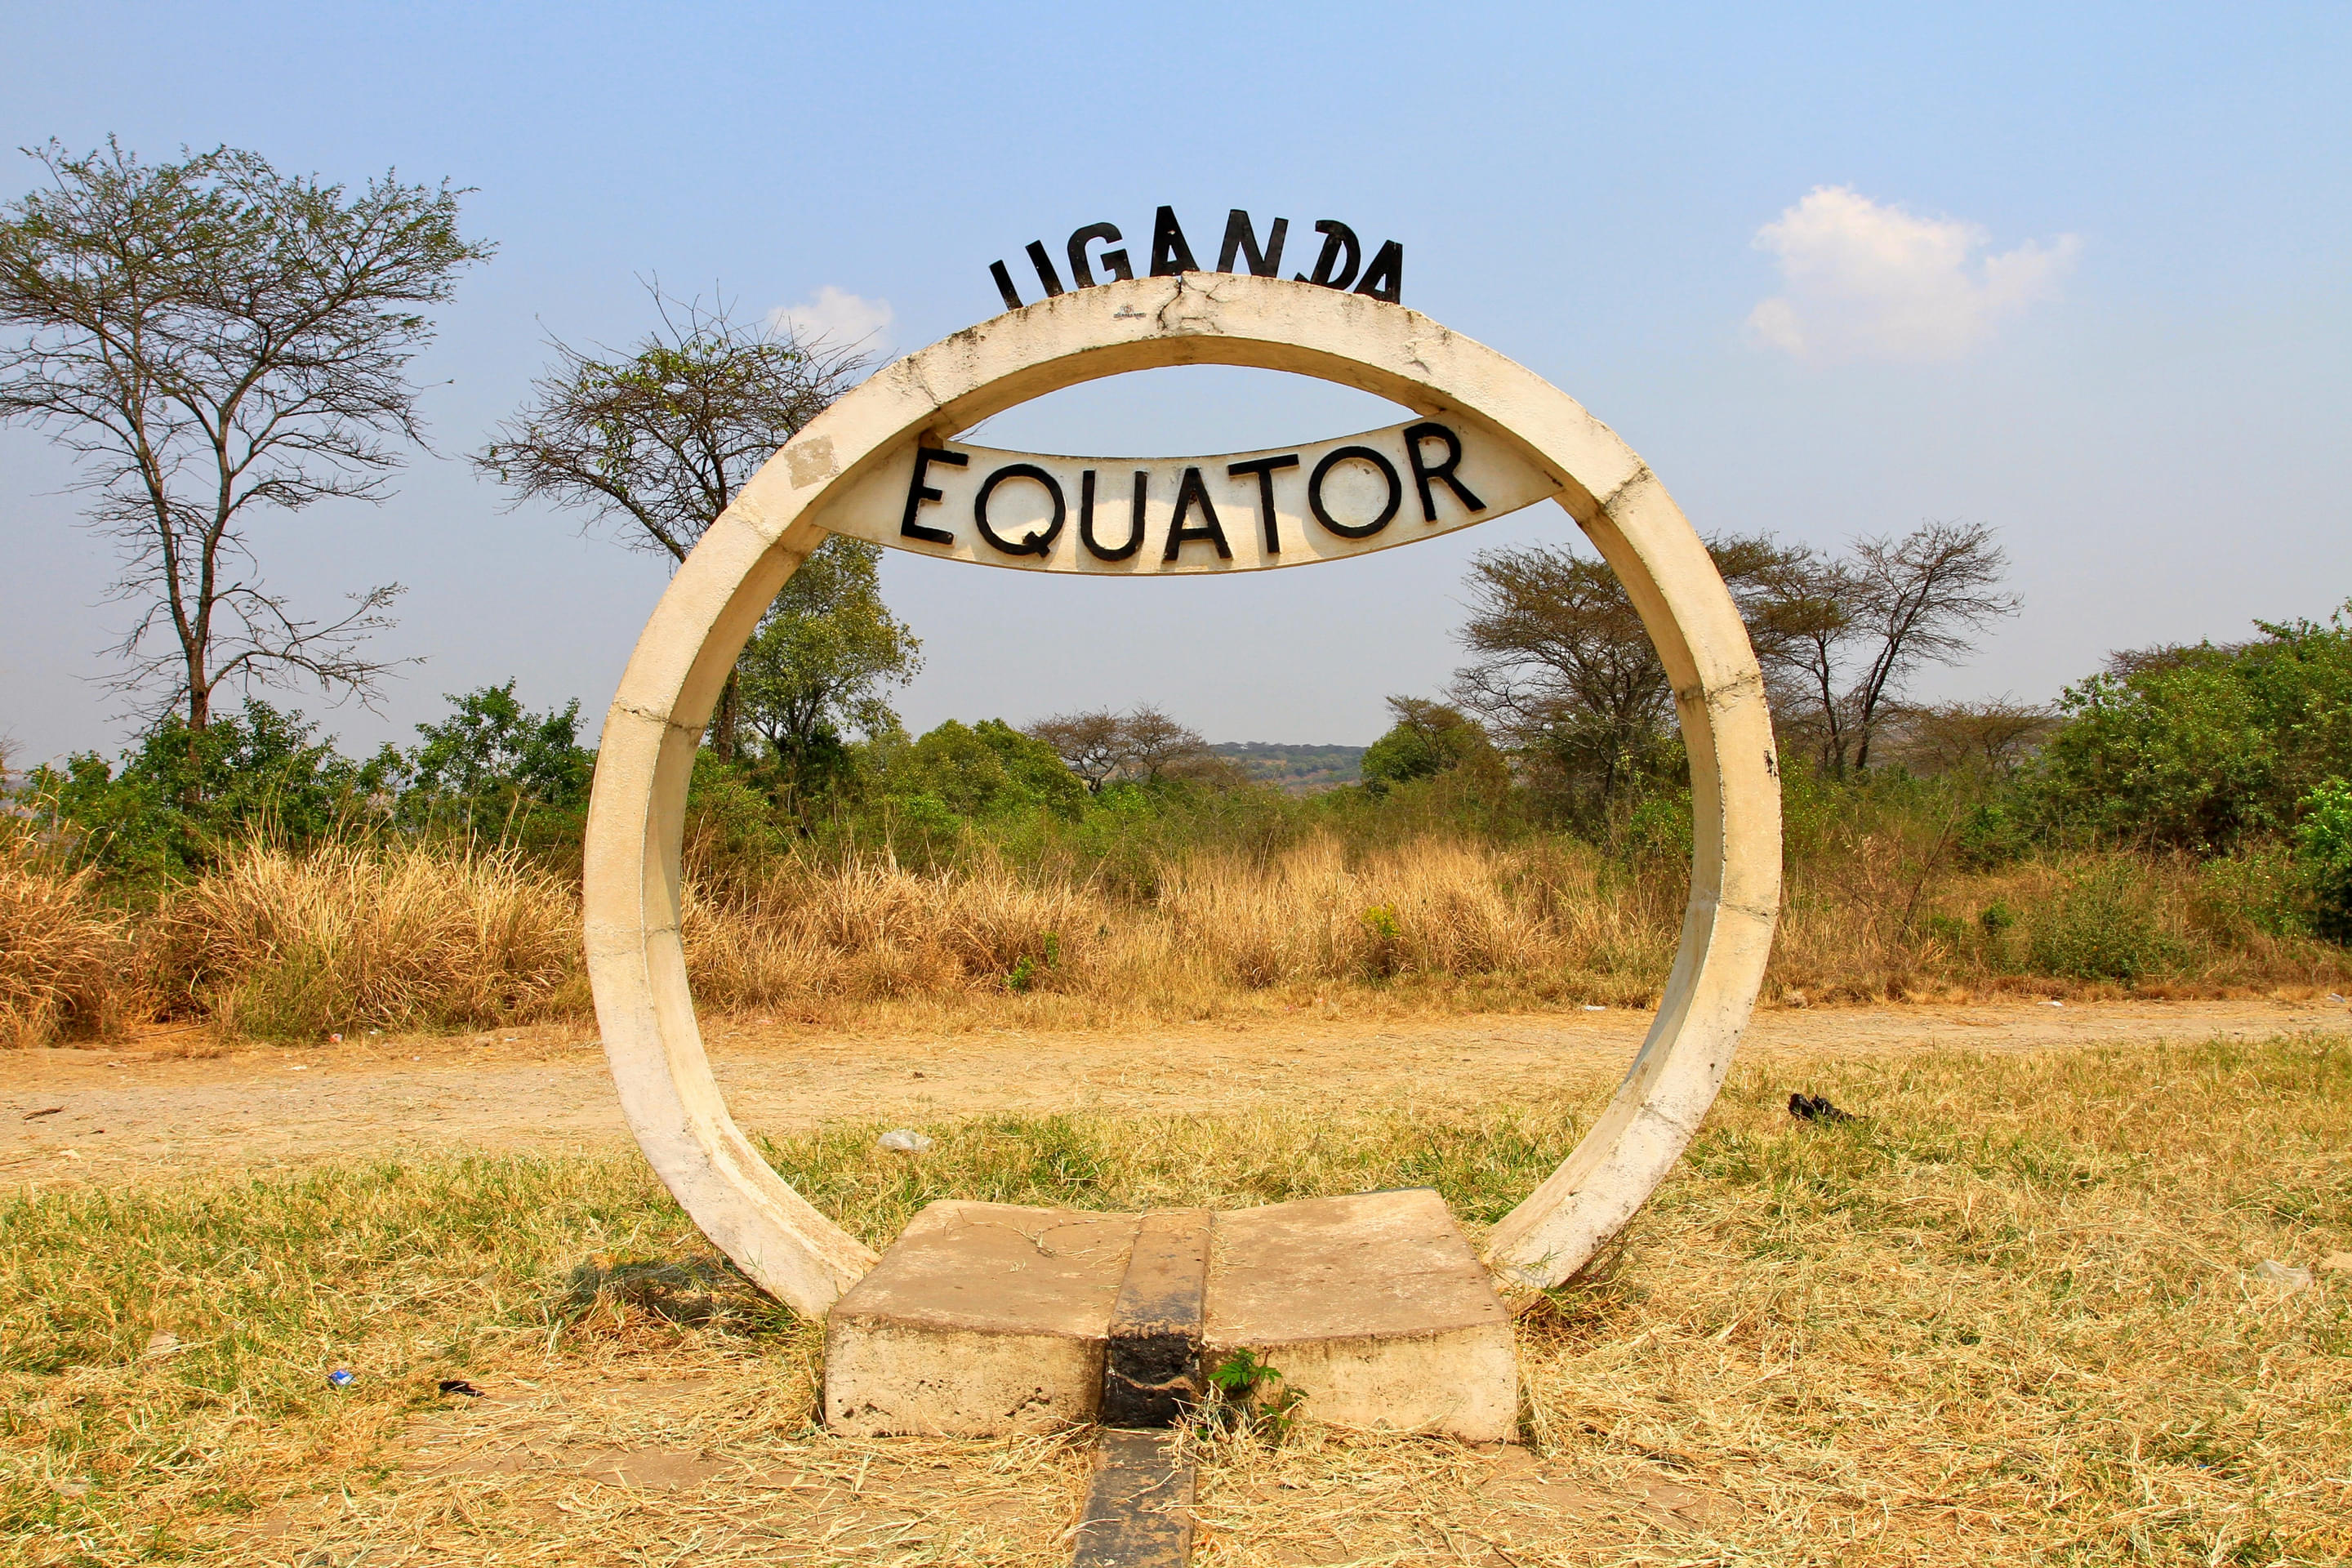 The Equator Overview